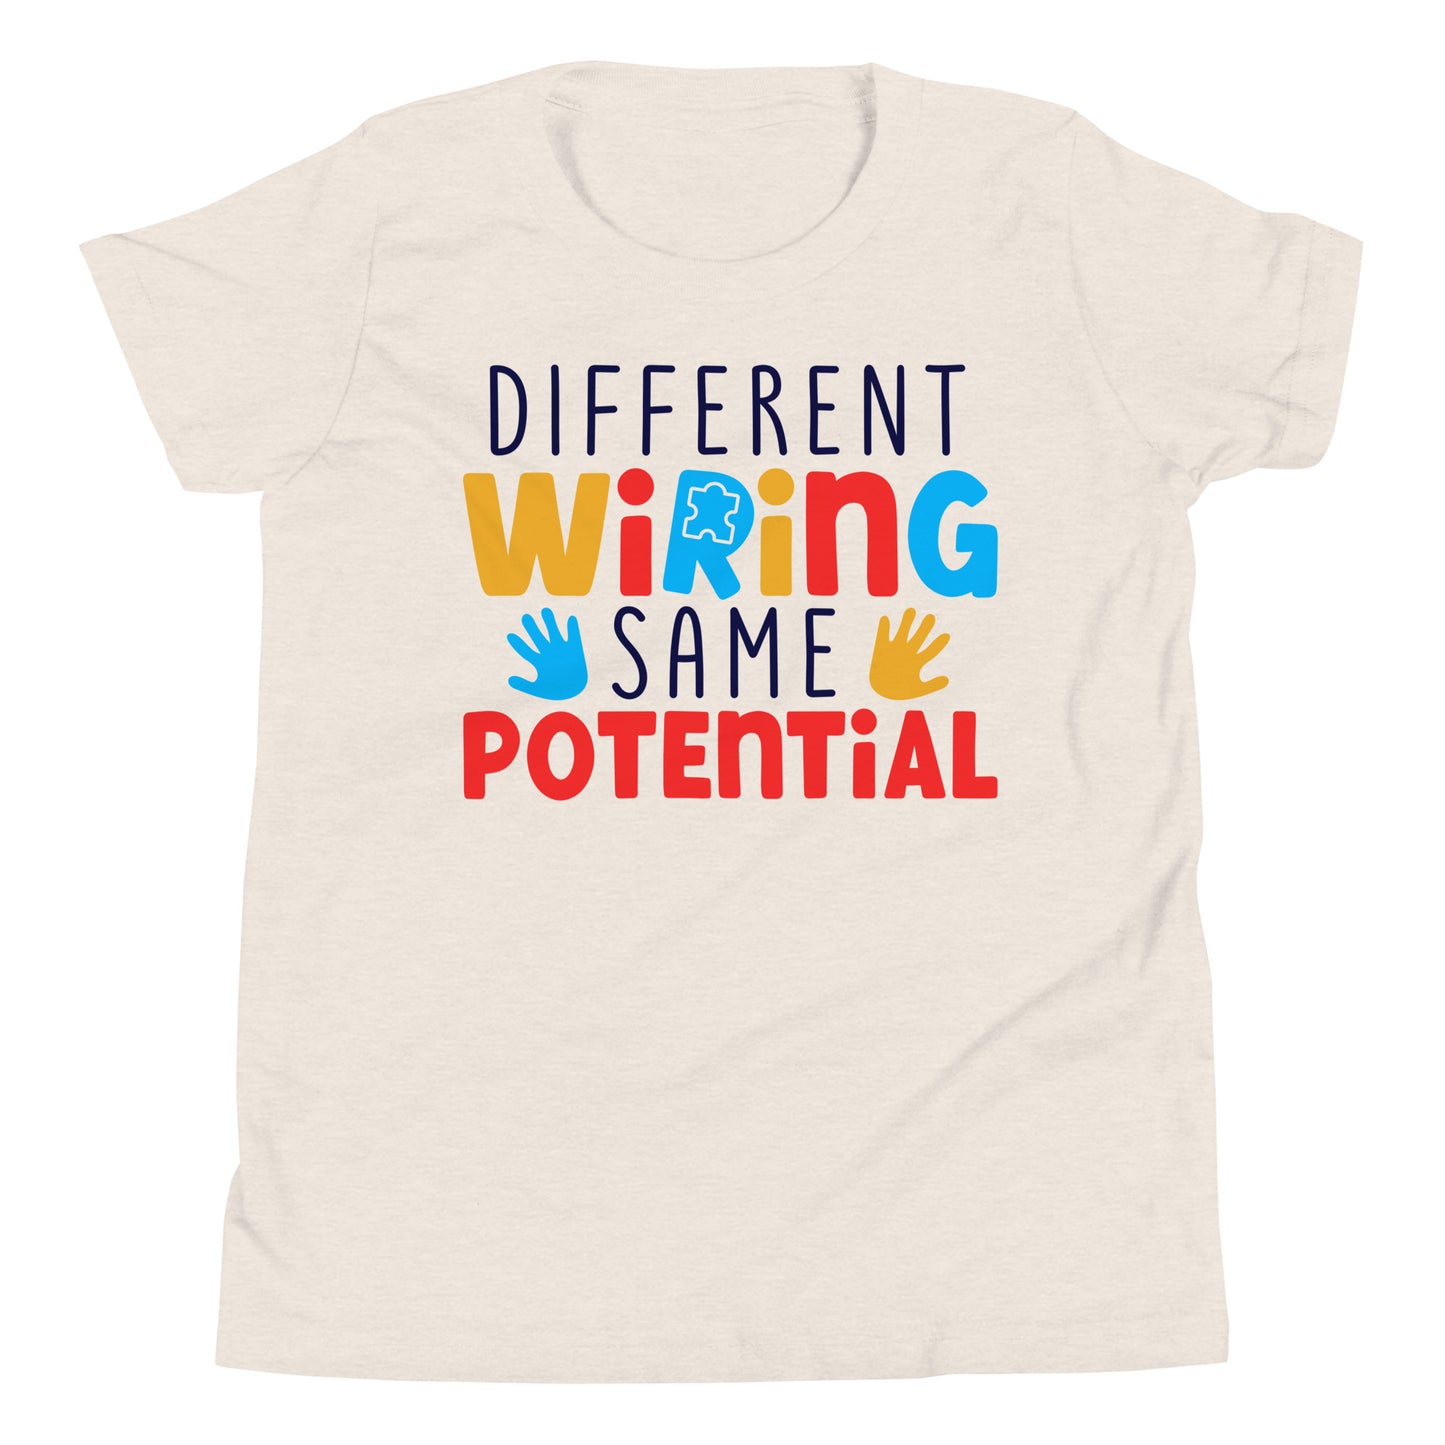 Different Wiring Same Potential Autism Acceptance Quality Cotton Bella Canvas Youth T-Shirt